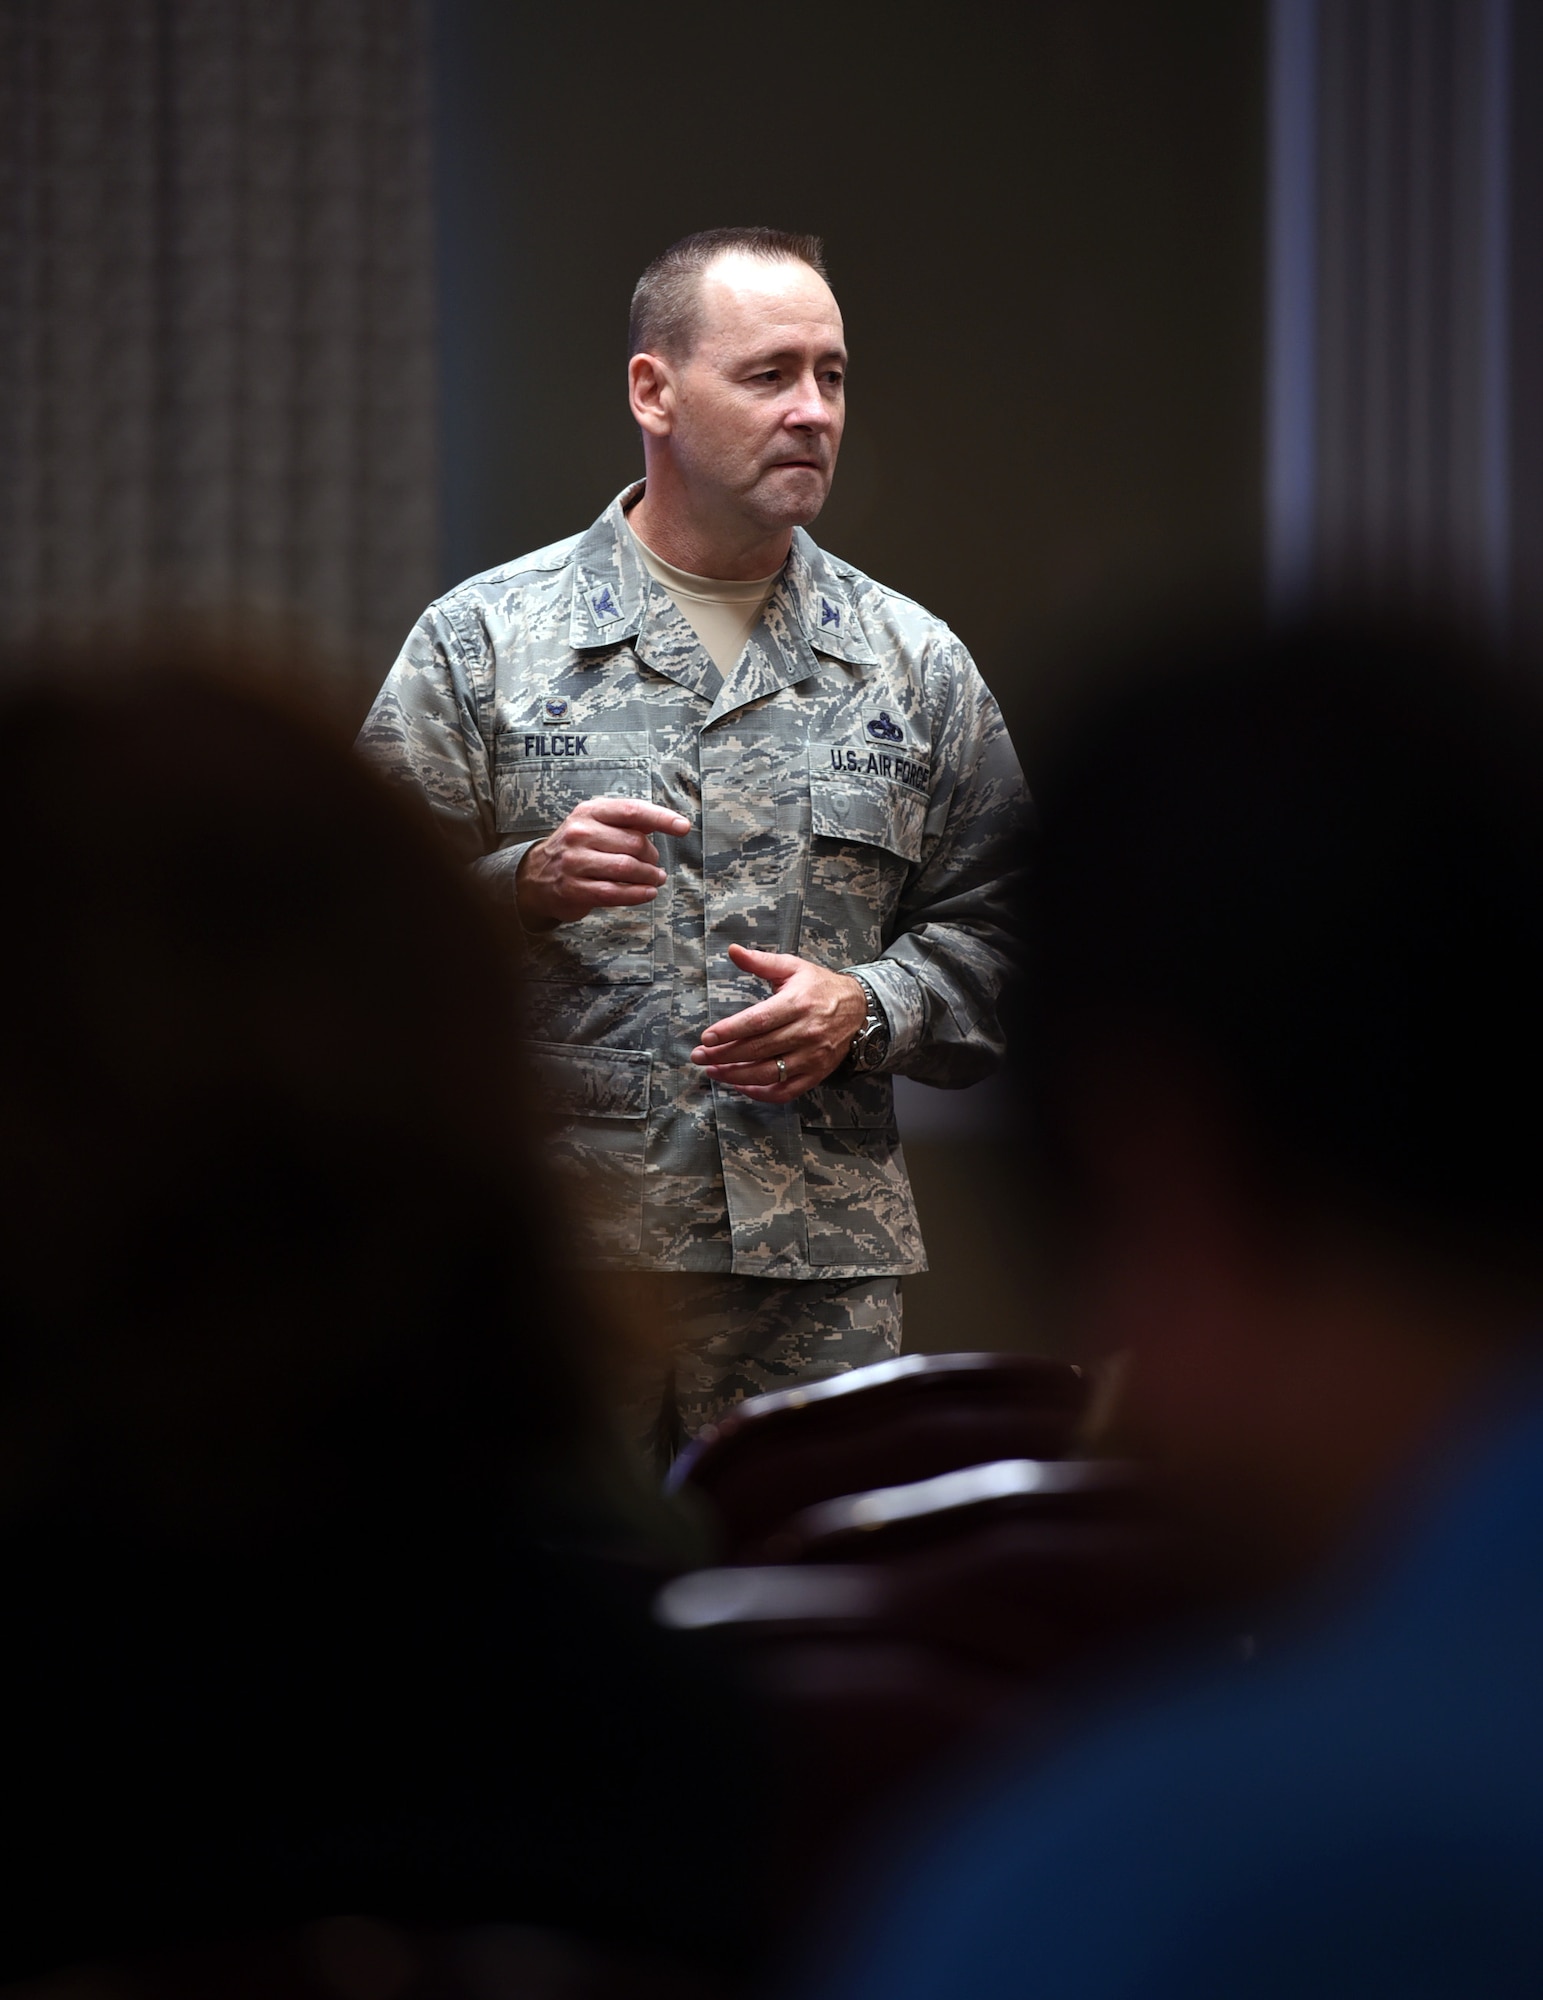 Base residents gathered at the Tinker Event Center on July 23 to hear from 72nd Air Base Wing Commander Col. Paul Filcek and Balfour Beatty Communities management about the improvements being made to base housing
issues. (U.S. Air Force photo/Kelly White)